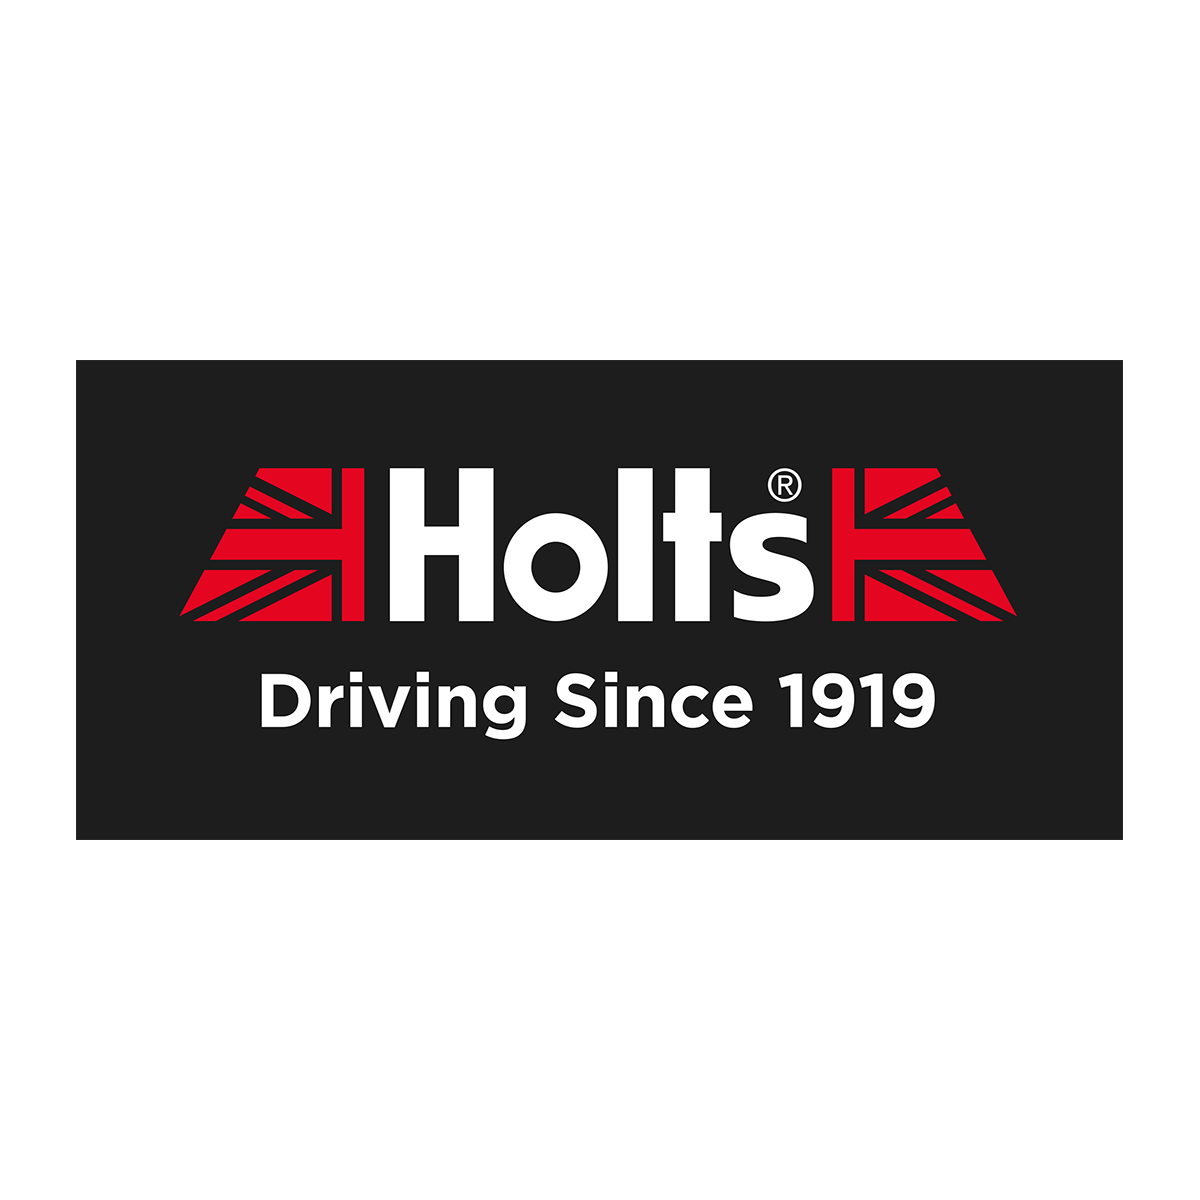 Where to Buy Holts Products